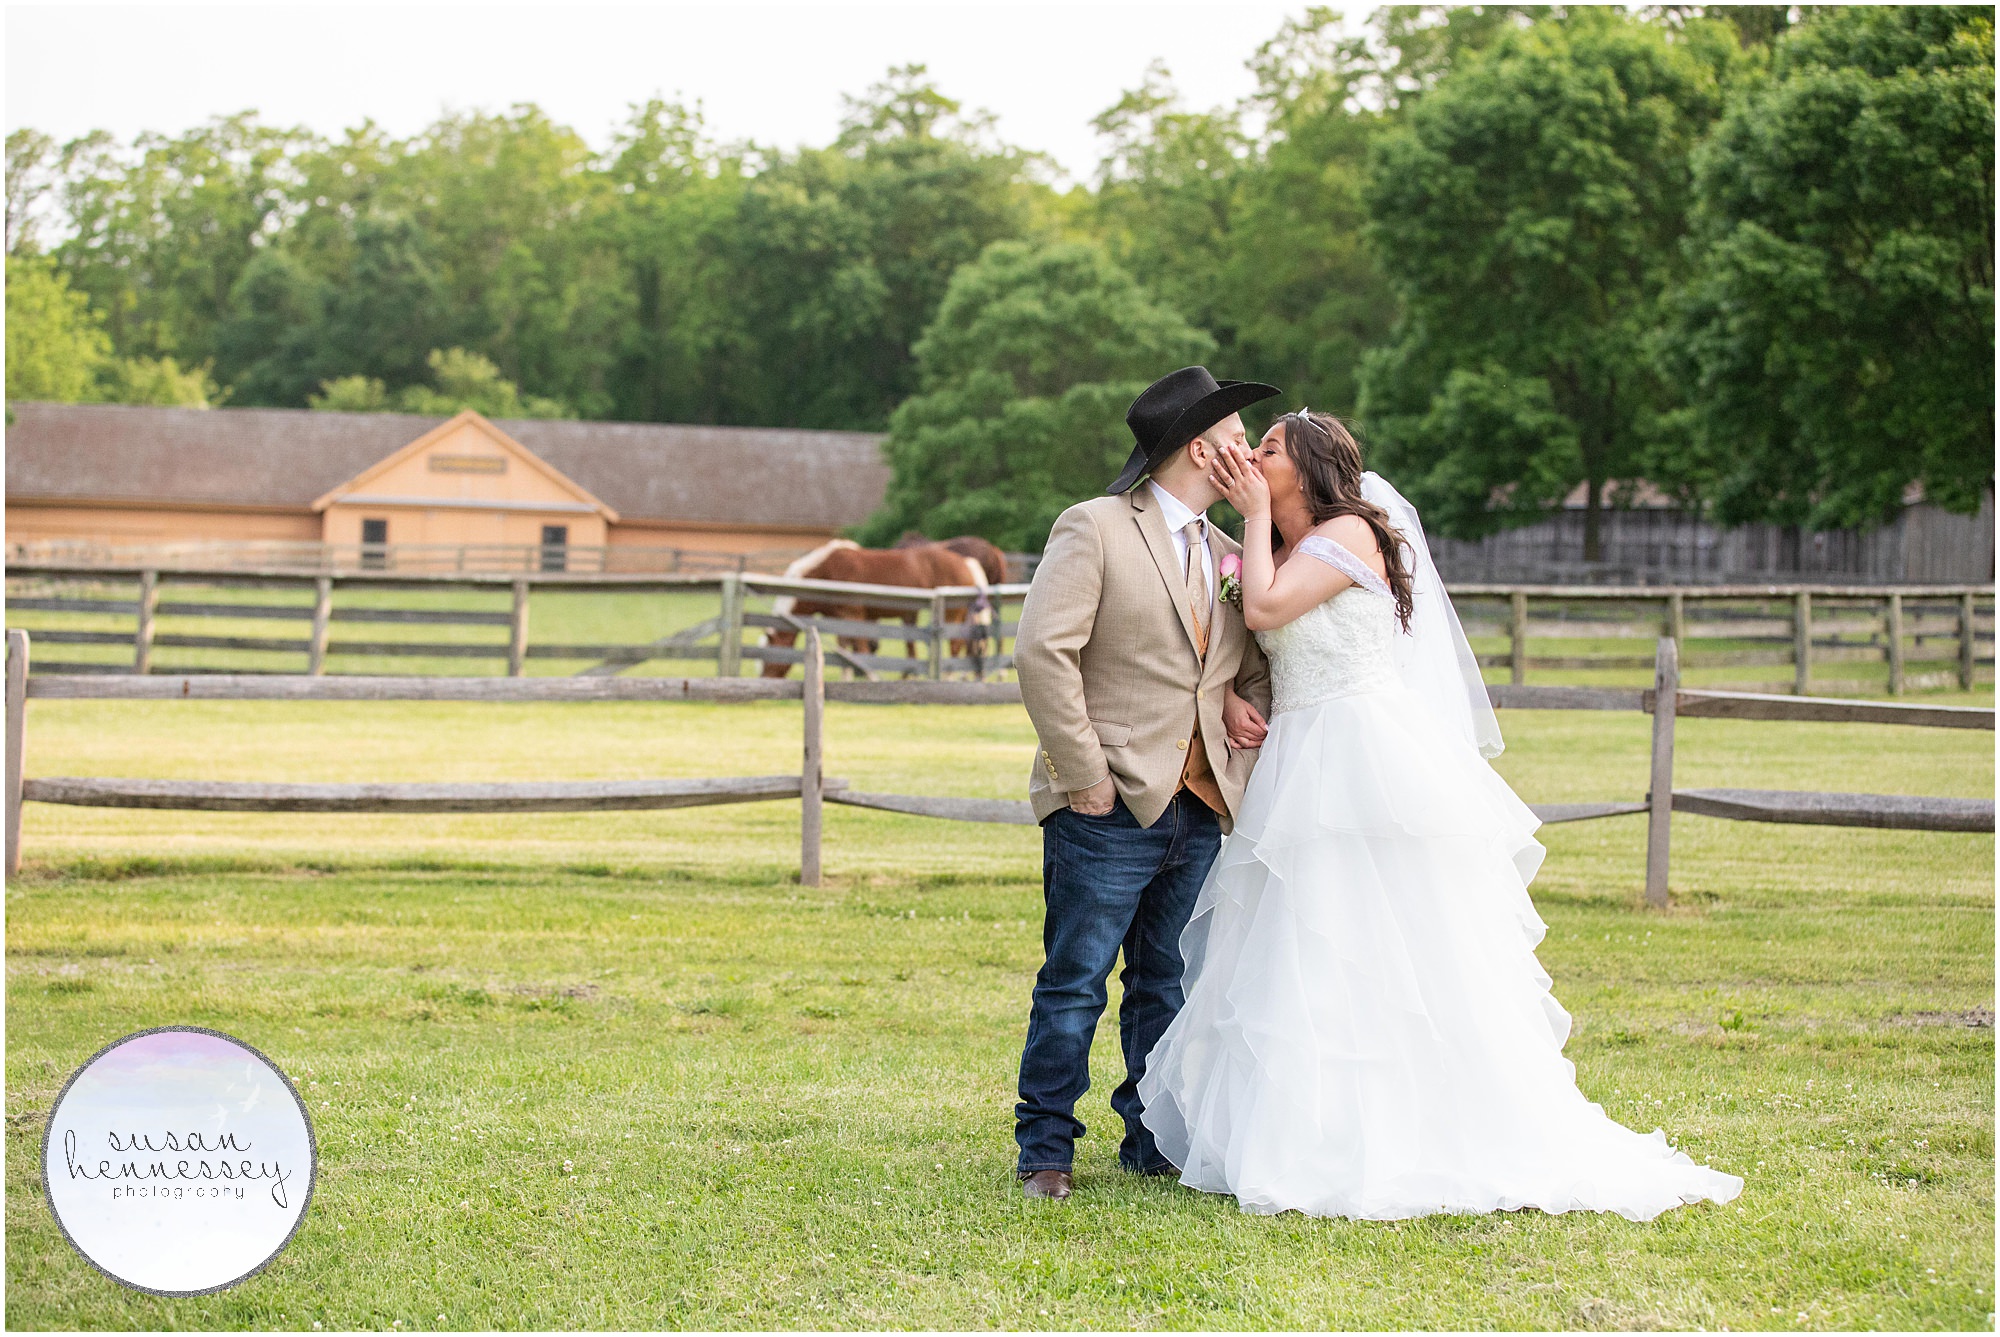 The Barn at Old Bethpage Wedding on Long island